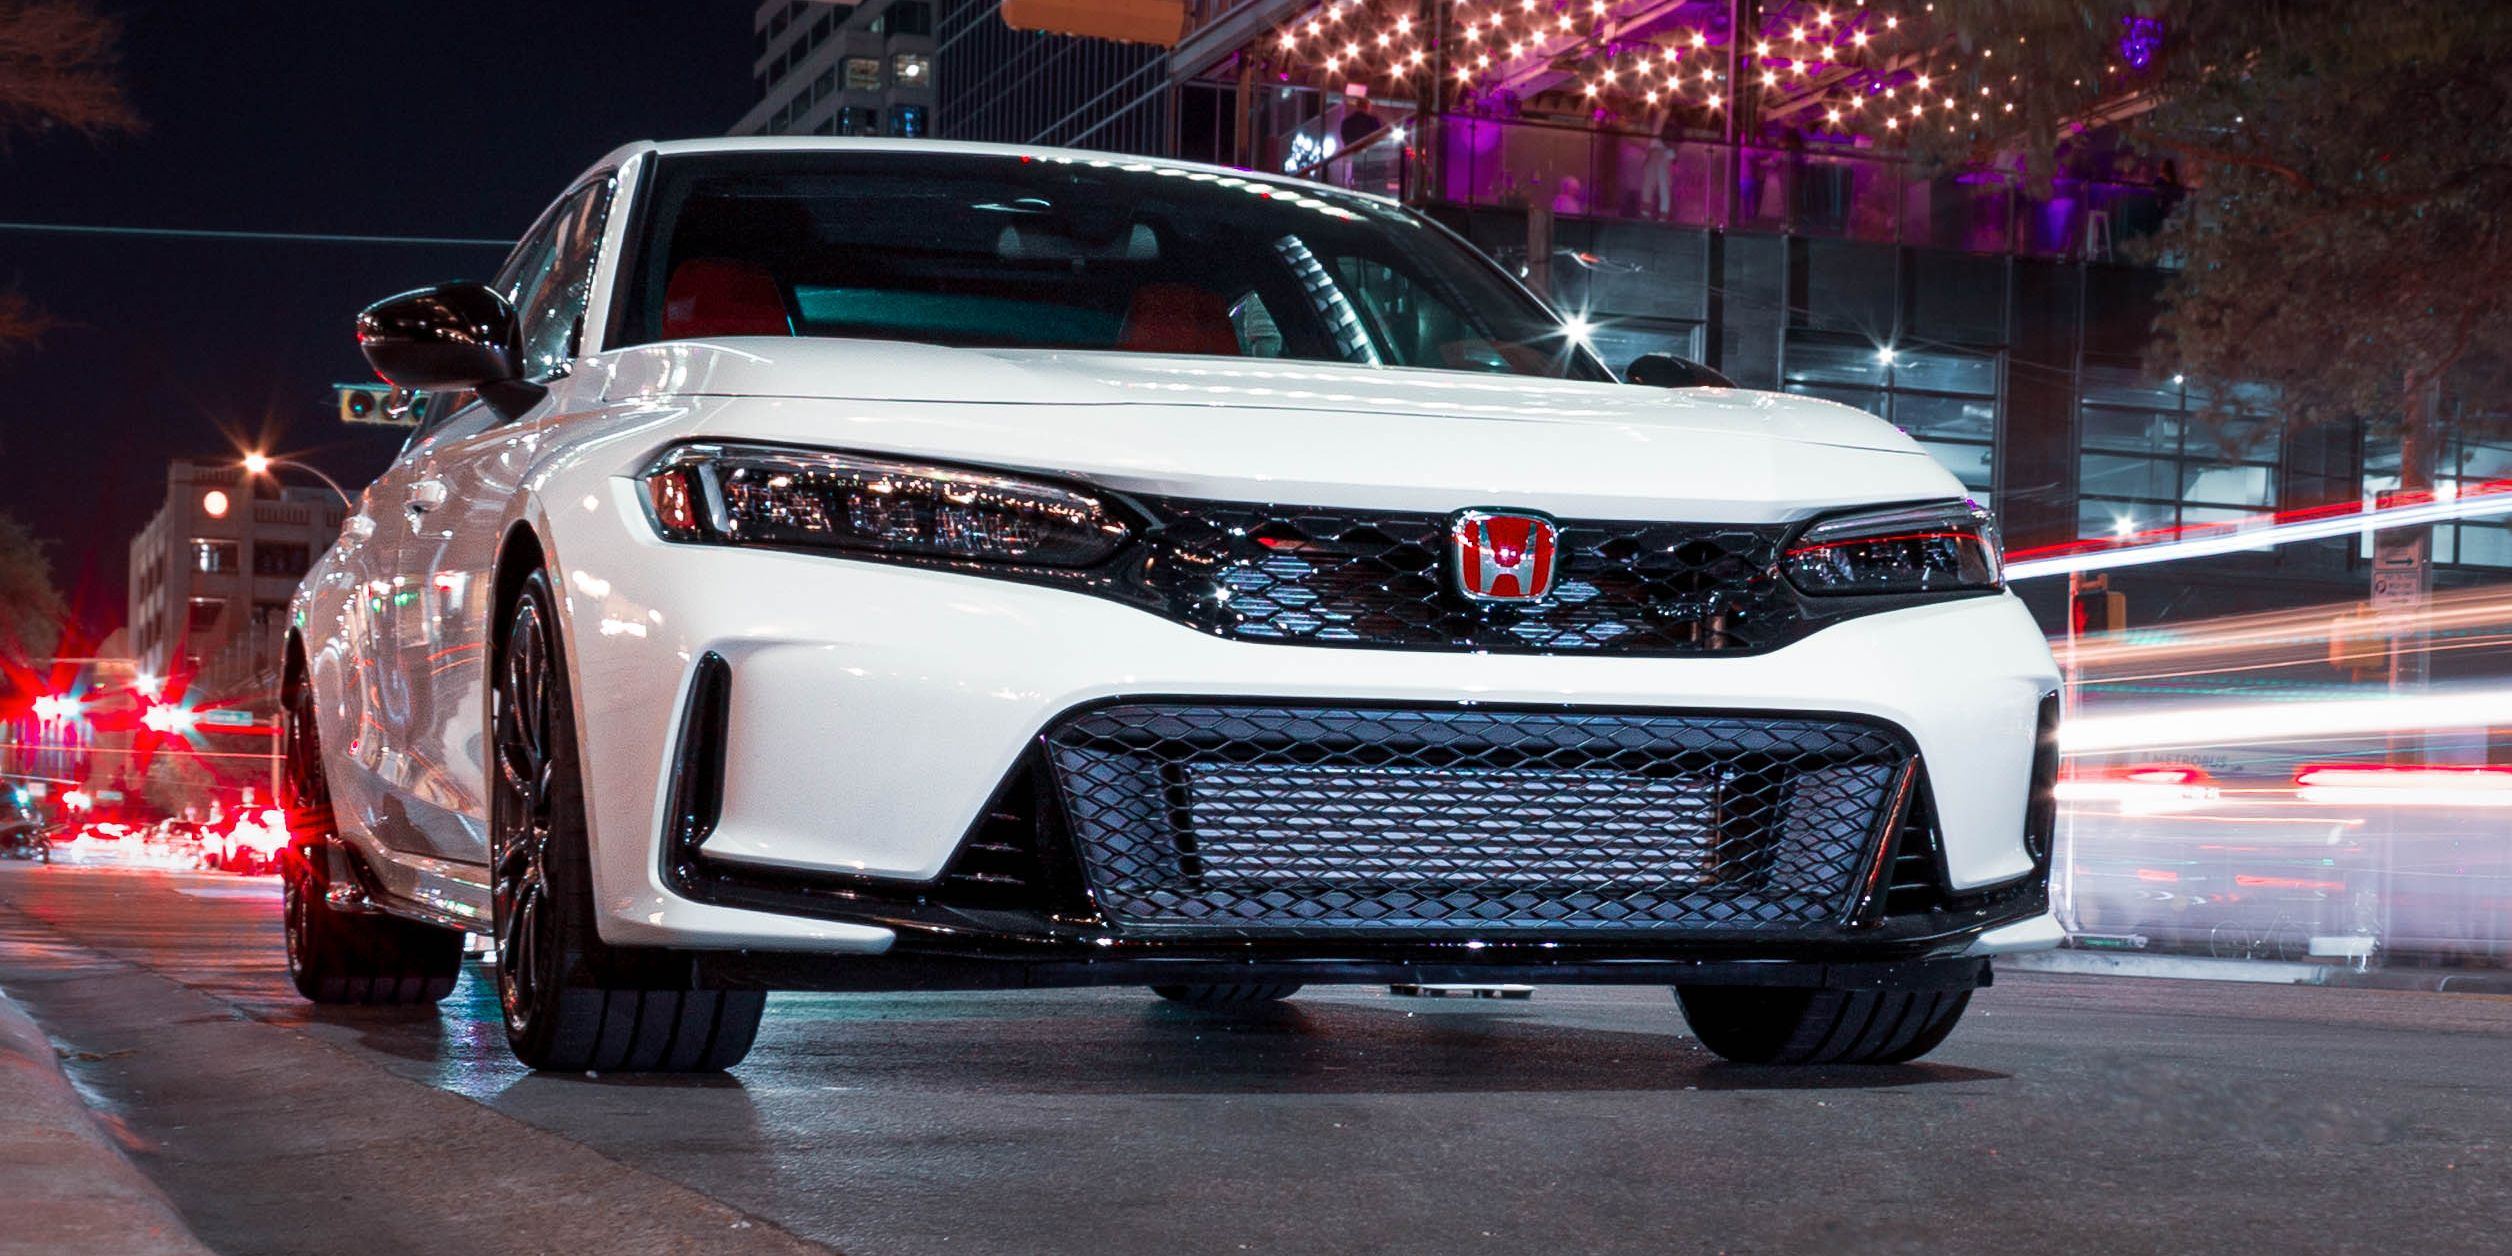 We Finally Know How Much the 2023 Honda Civic Type R Will Cost